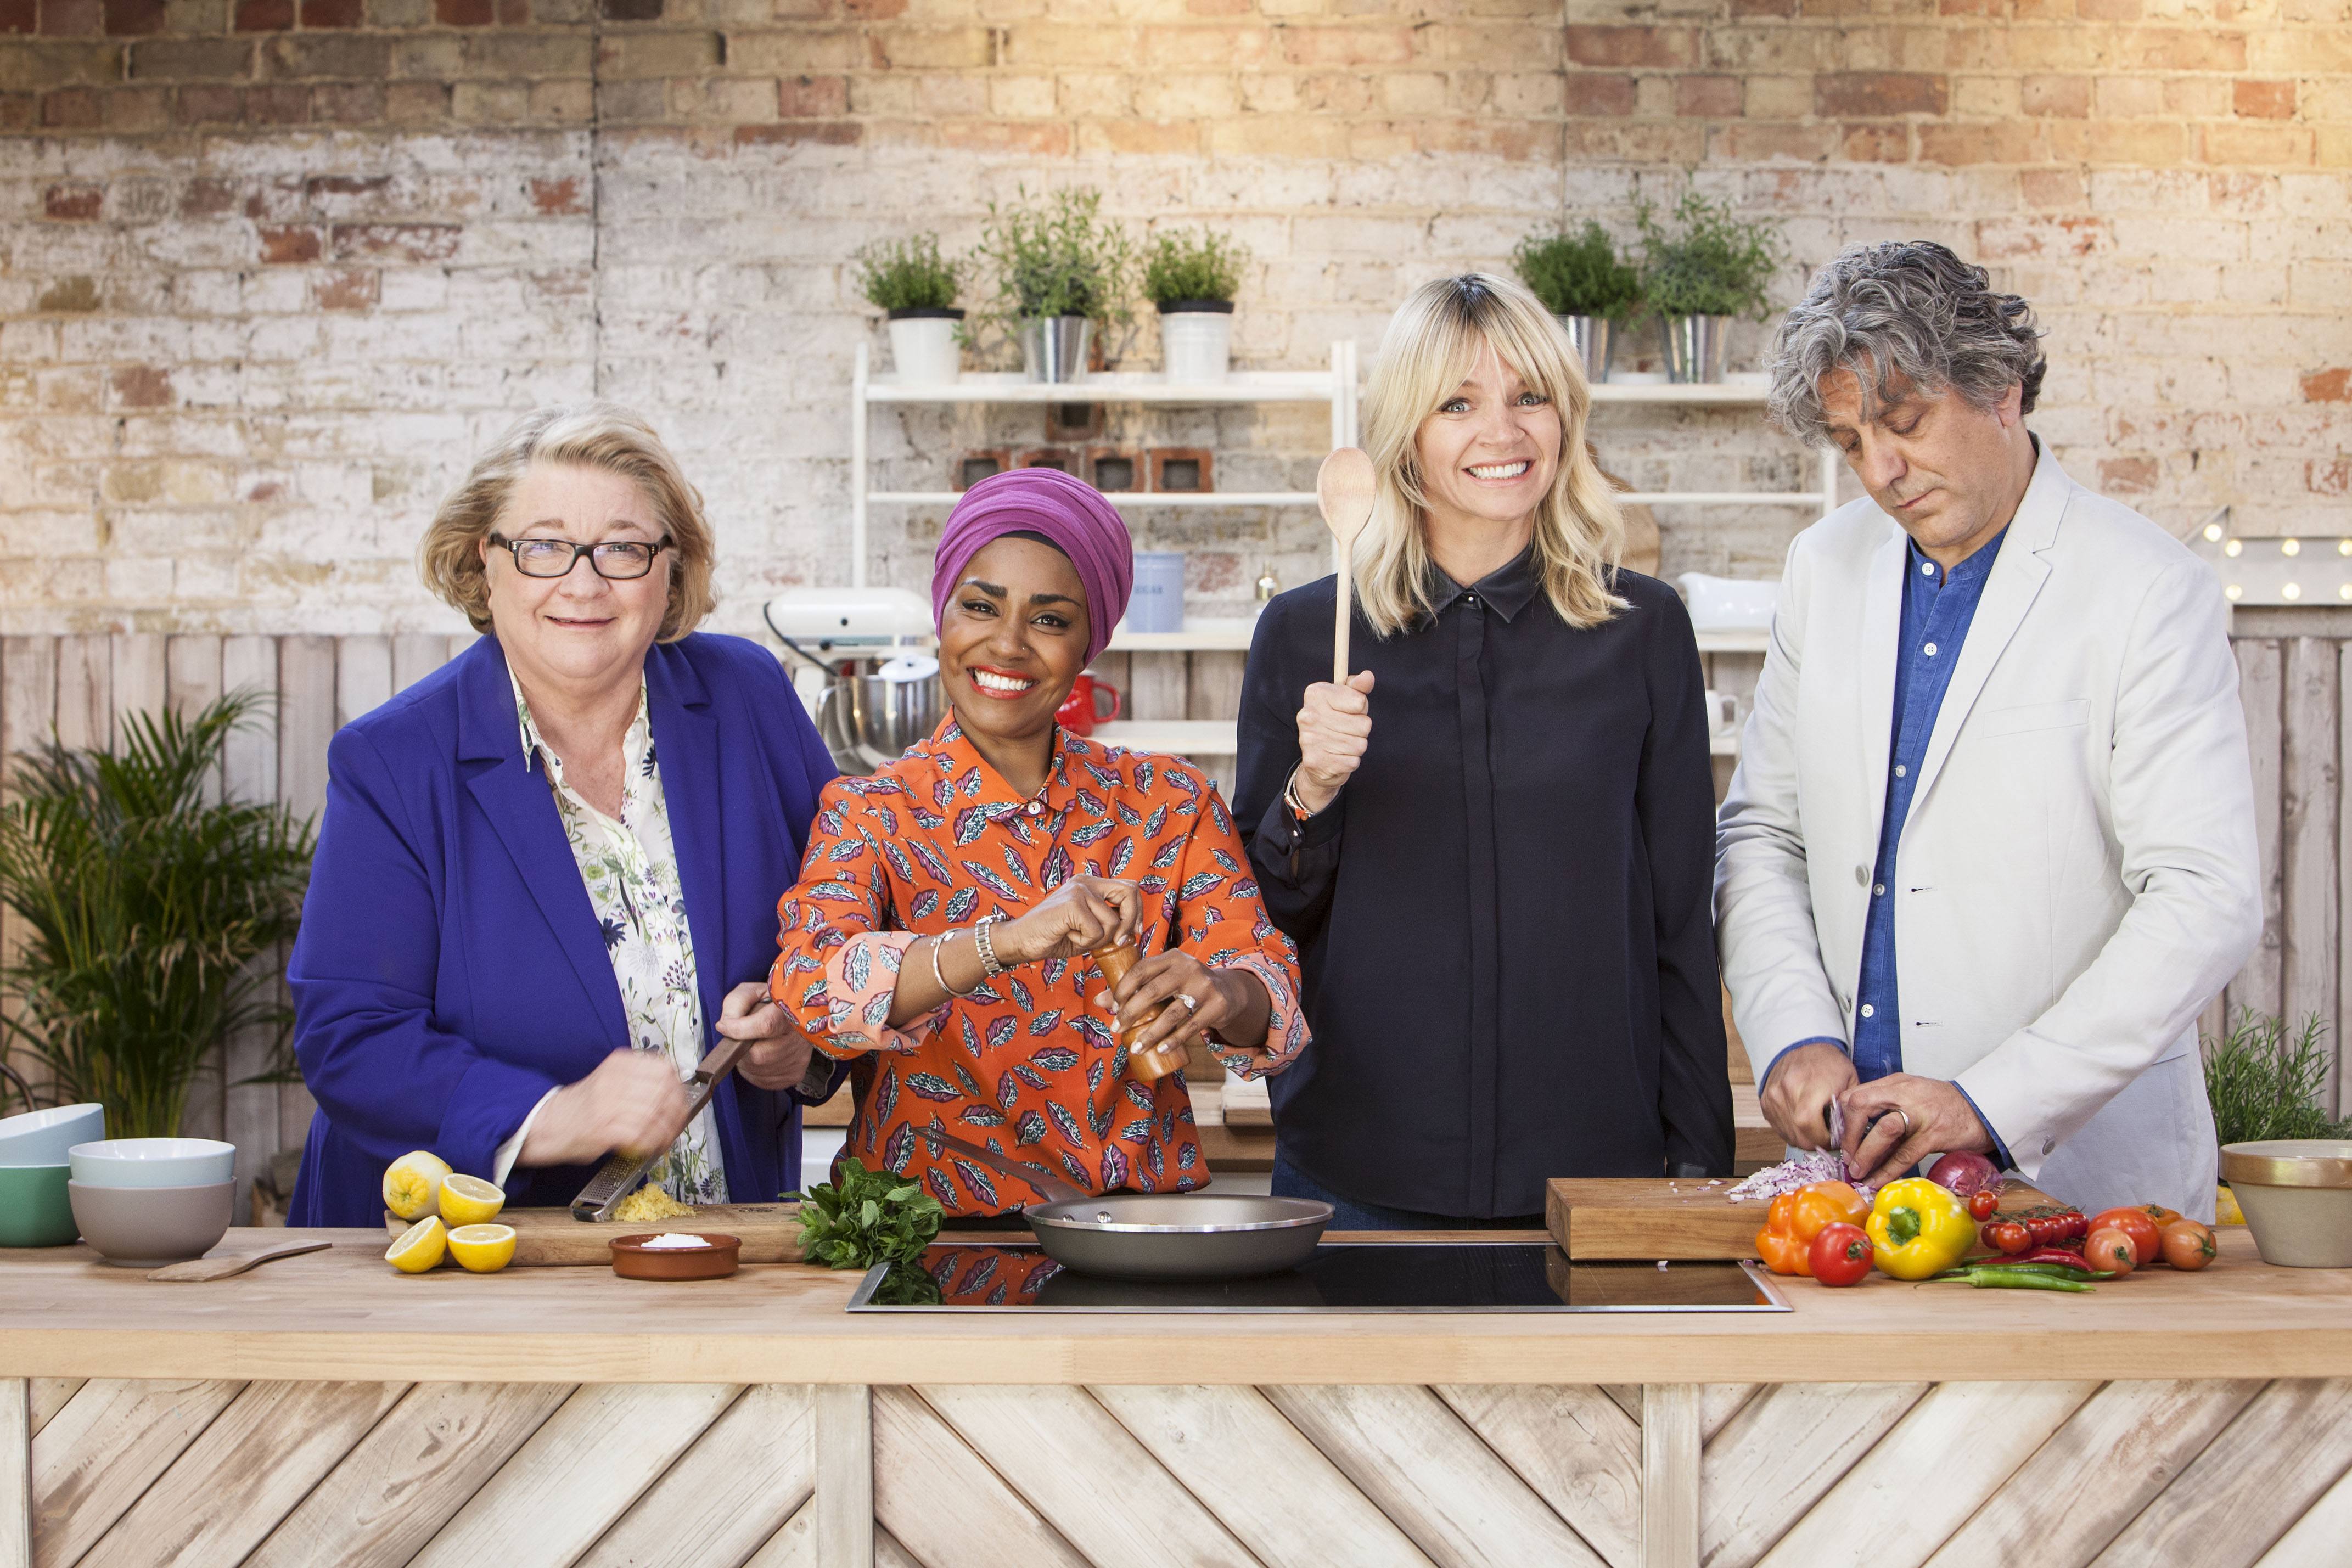 From hot cakes to host as Nadiya Hussain fronts new BBC cooking show